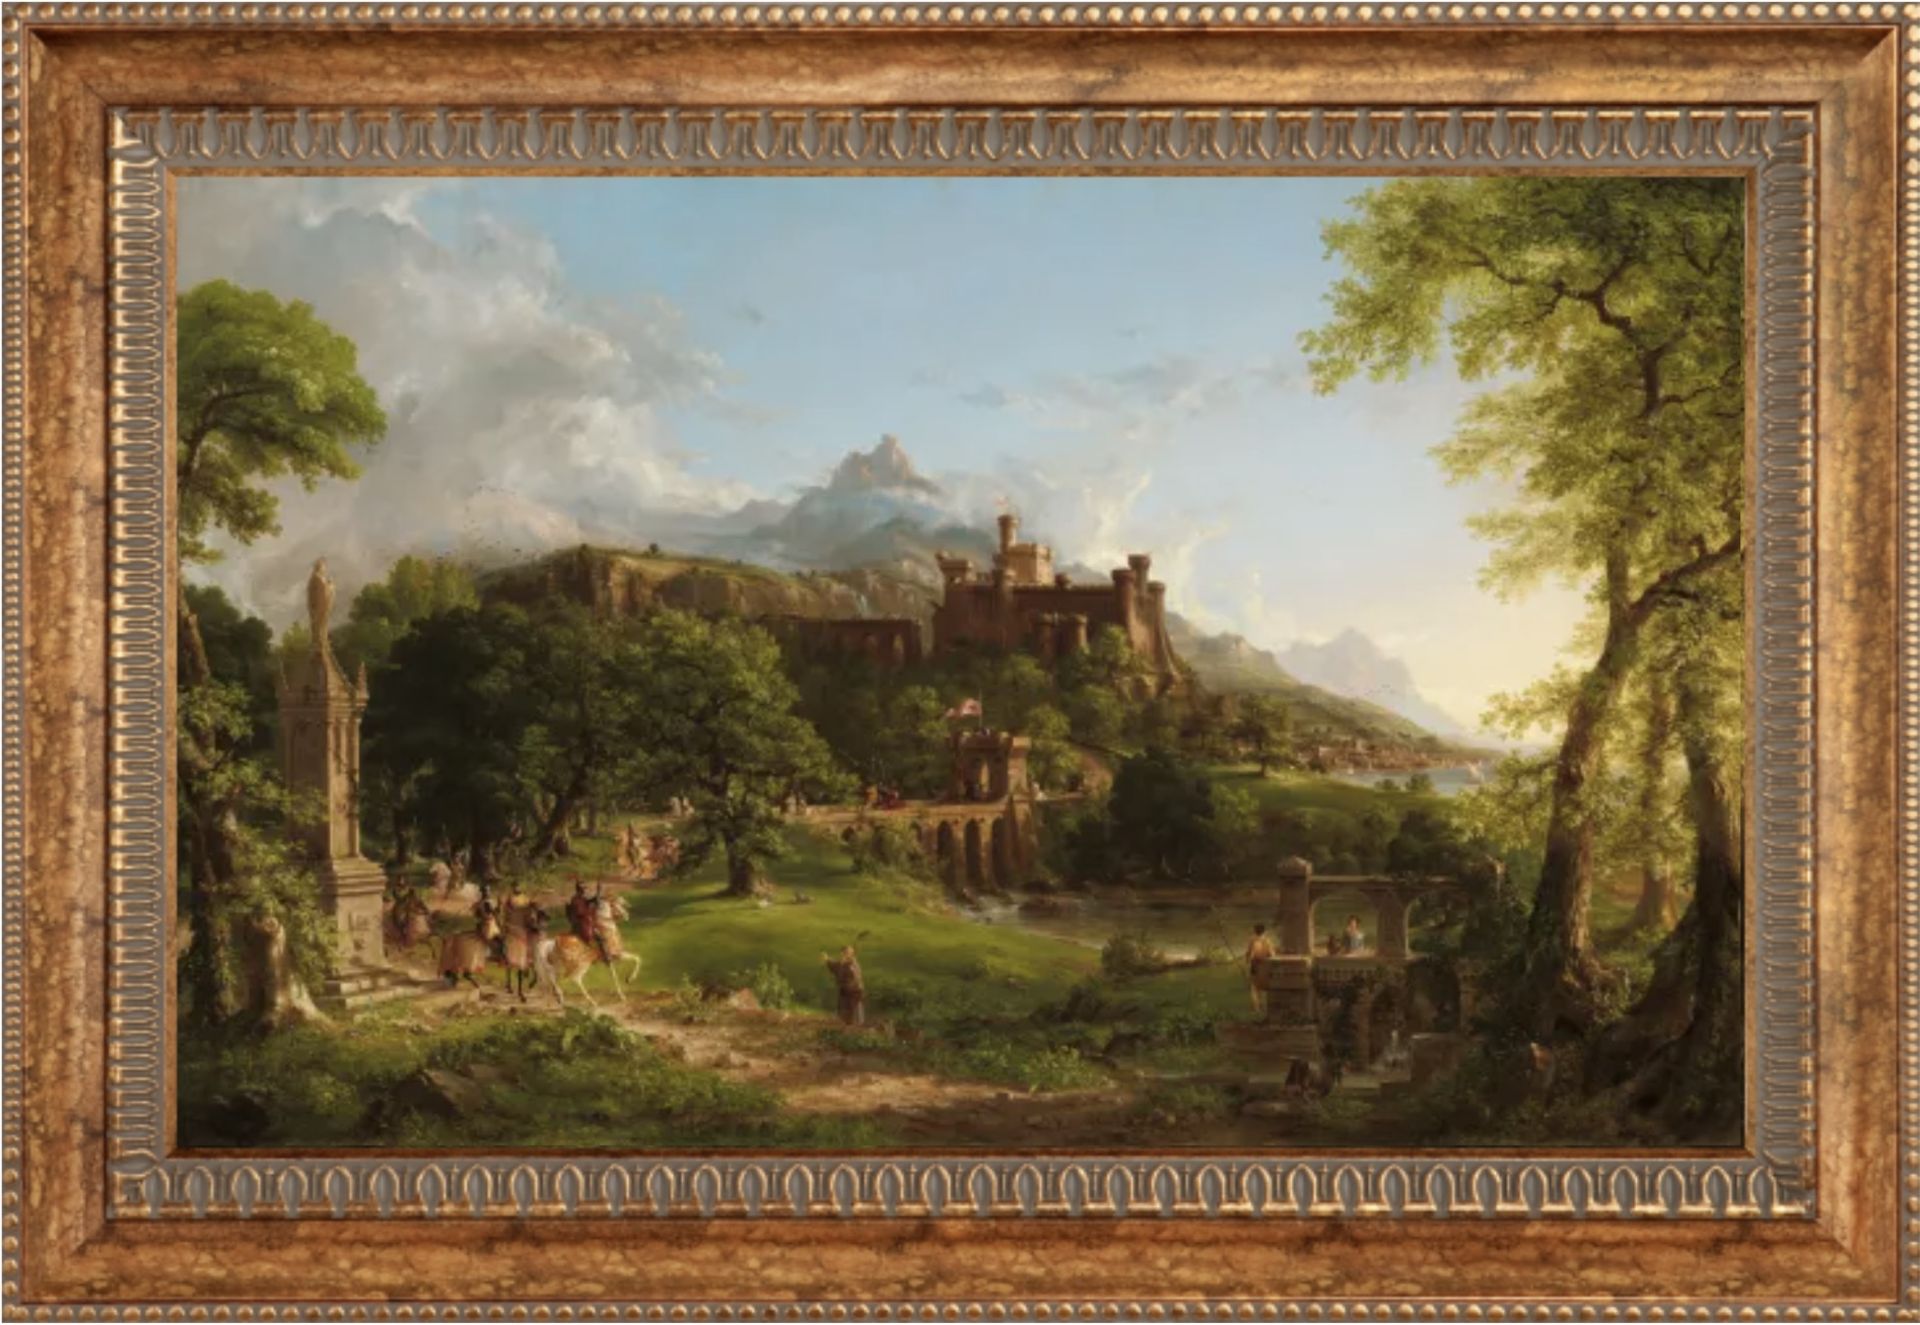 Thomas Cole "The Departure" Oil Painting